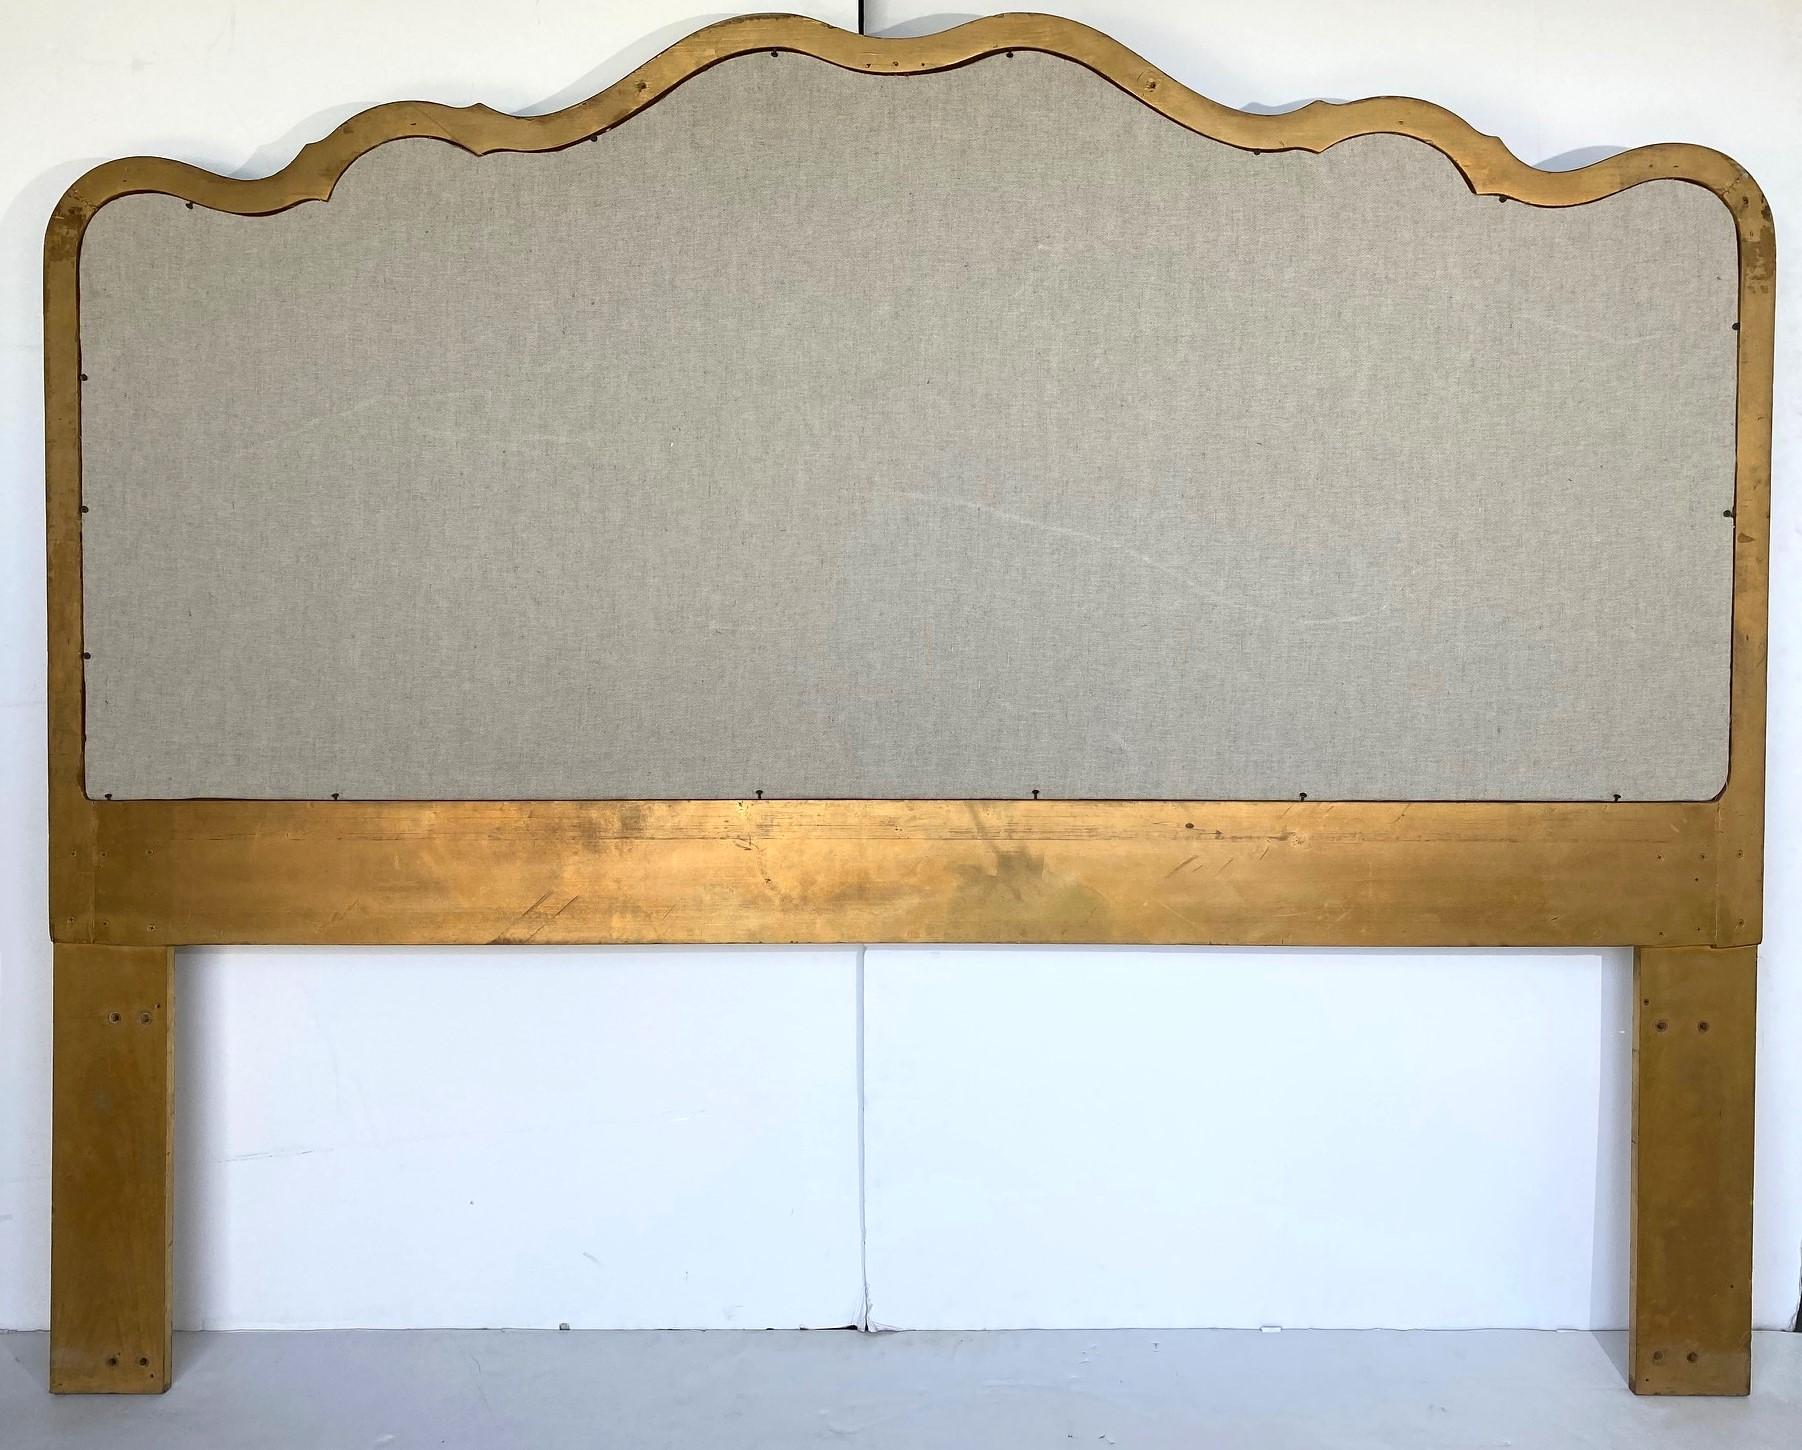 A king-size wood frame headboard gilded and upholstered in linen.
 